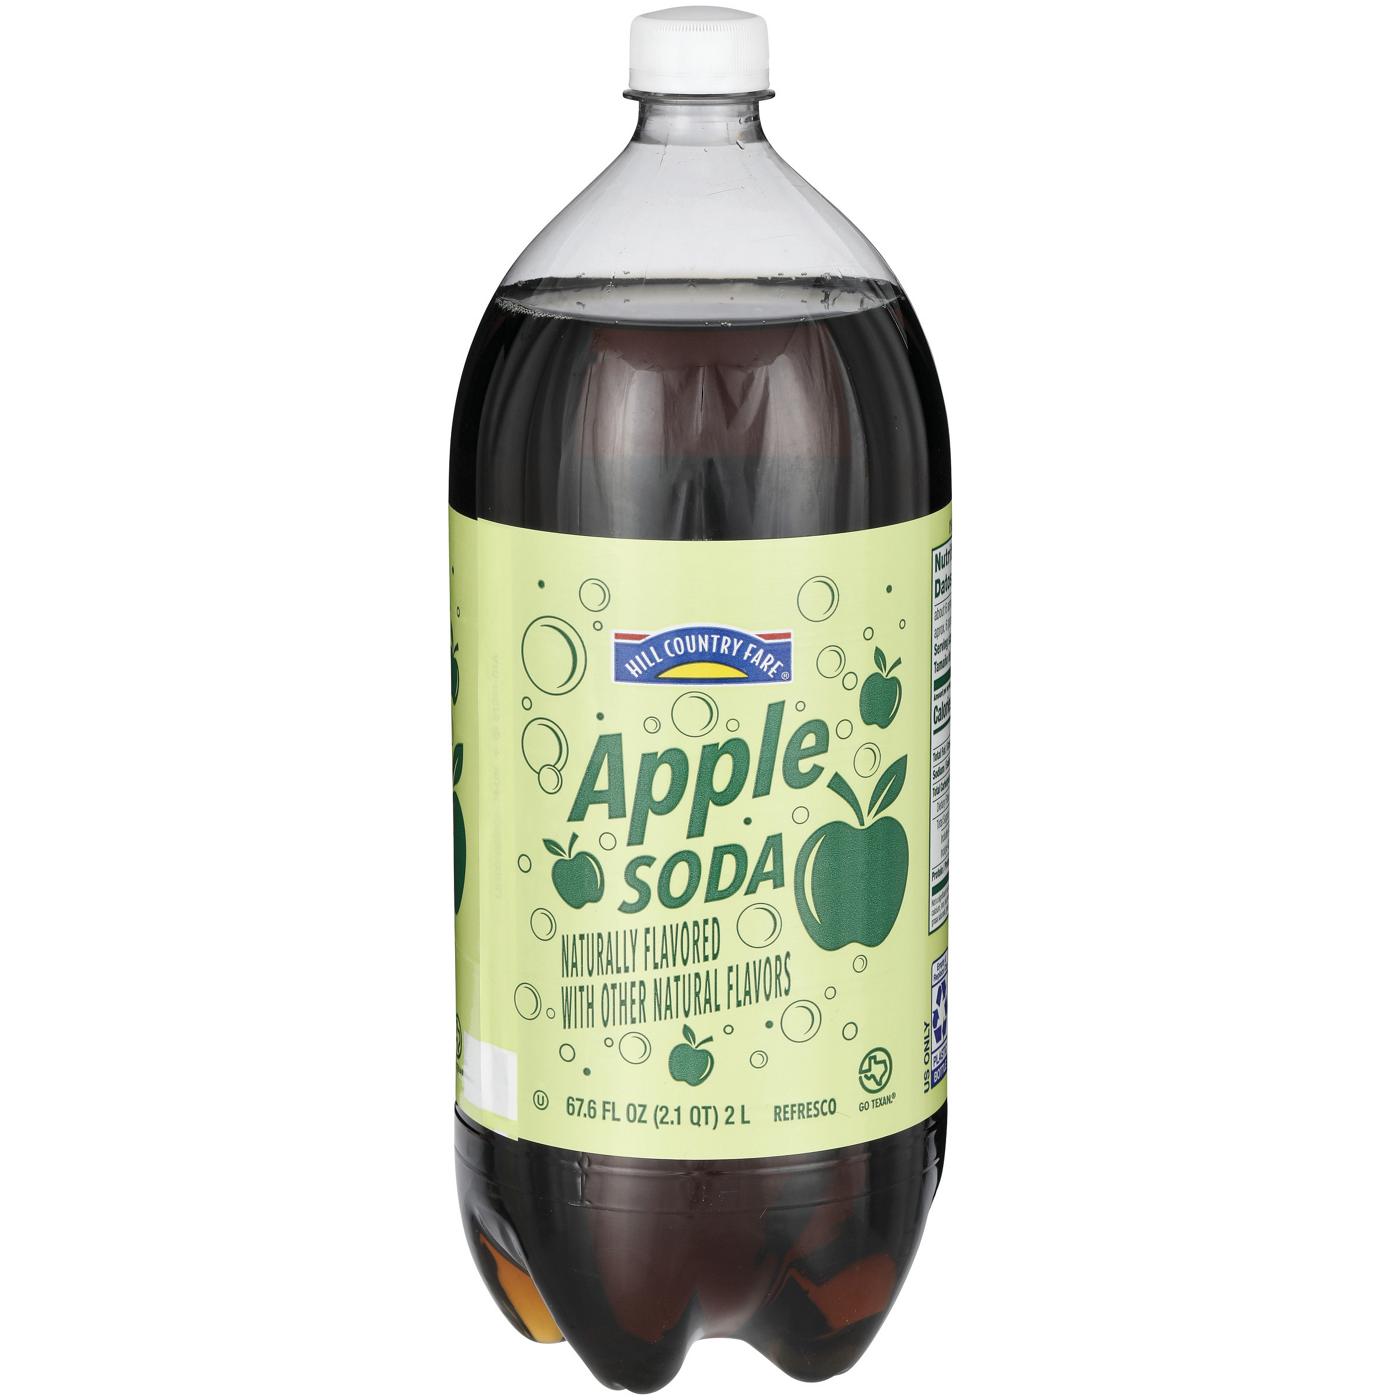 HCF Hill Country Fair Apple Soda; image 2 of 2